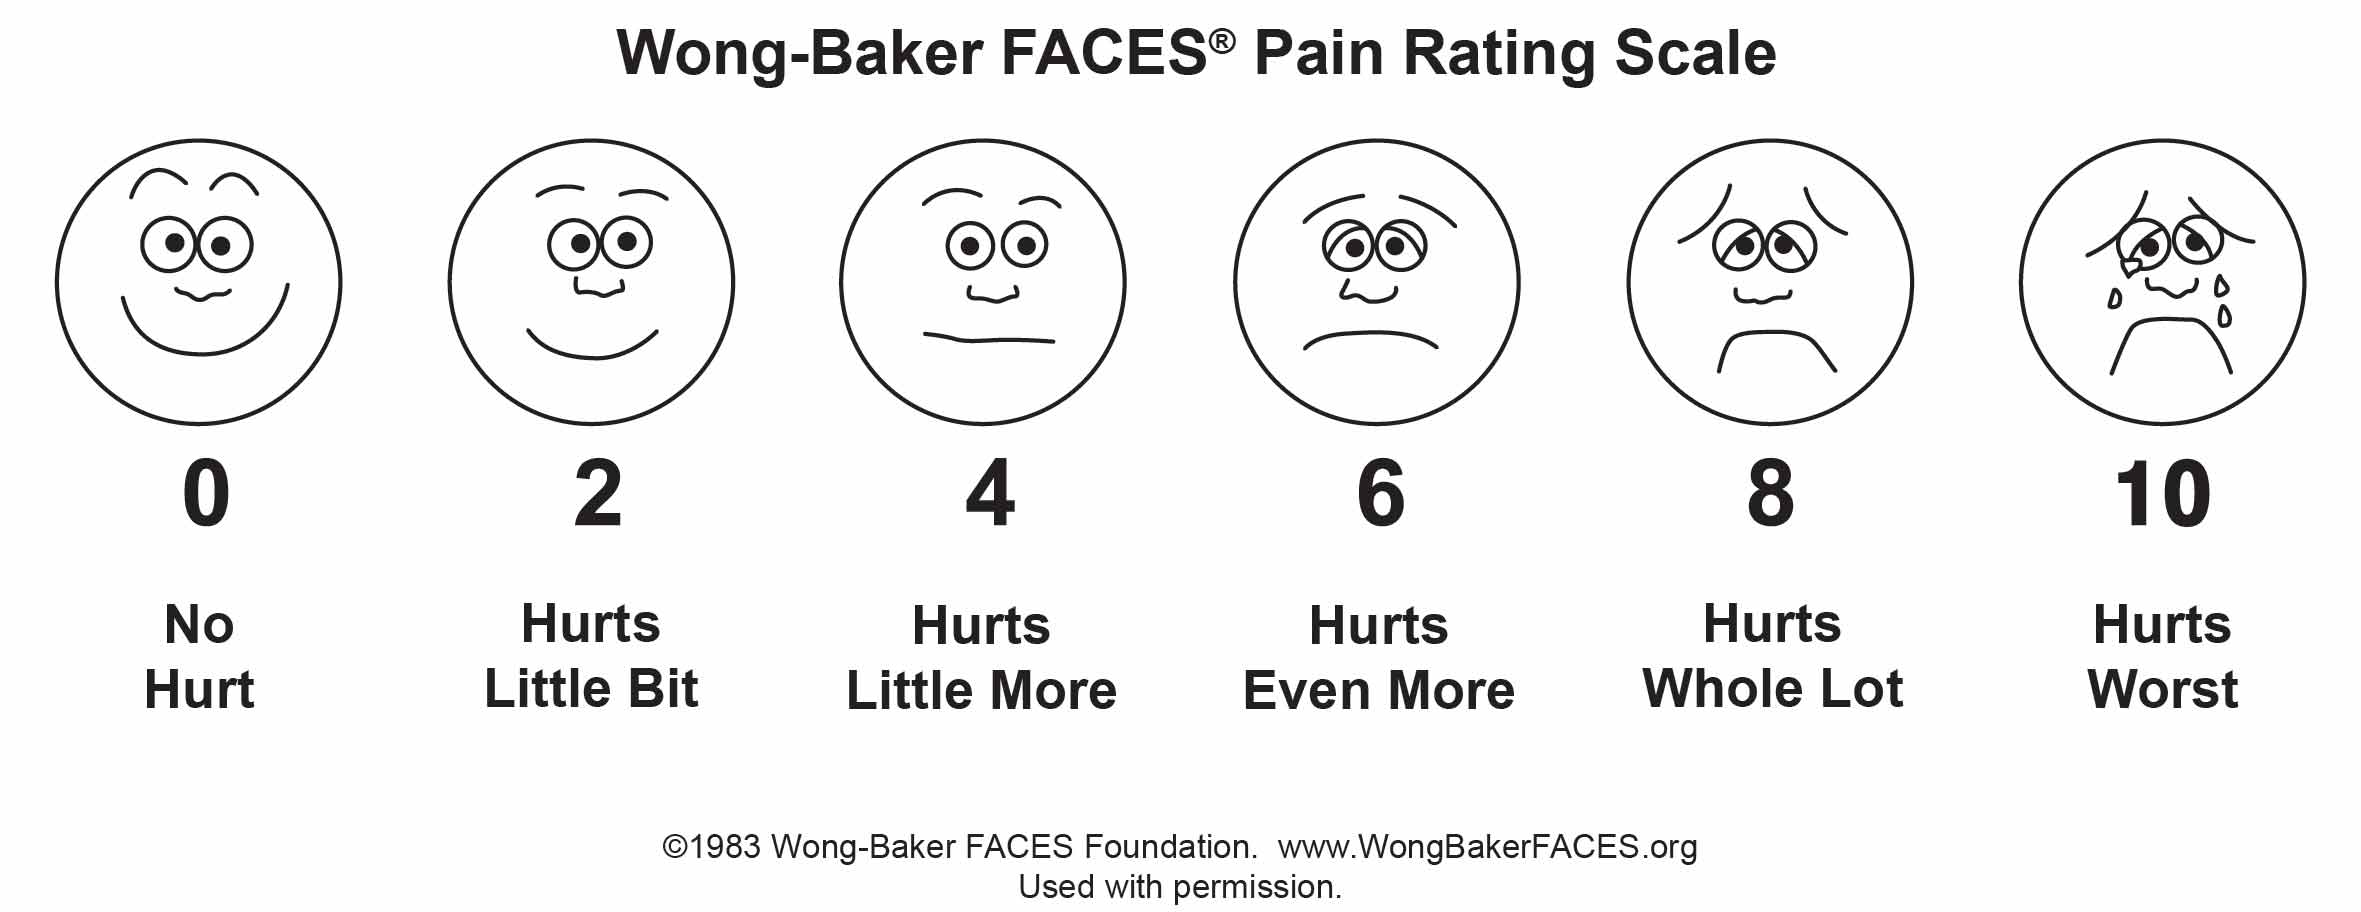 Wong Baker Pain Scale 0 to 10 with 0 equaling no hurt and 10 equaling hurts worst